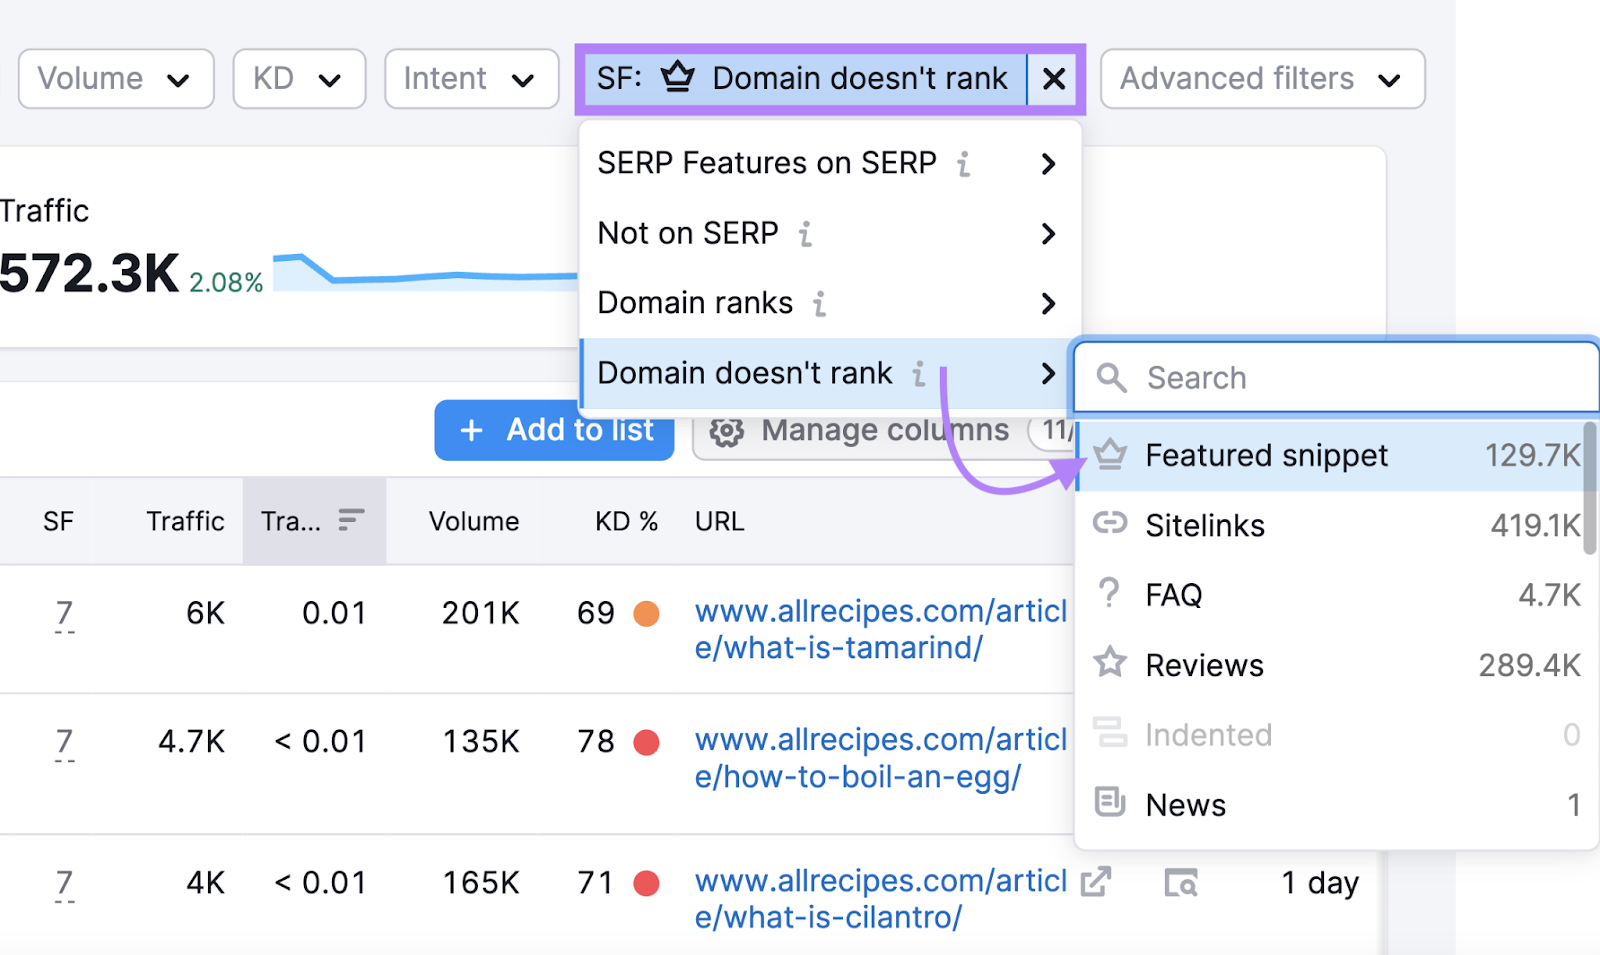 “Featured snippet" selected under "Domain doesn't rank"